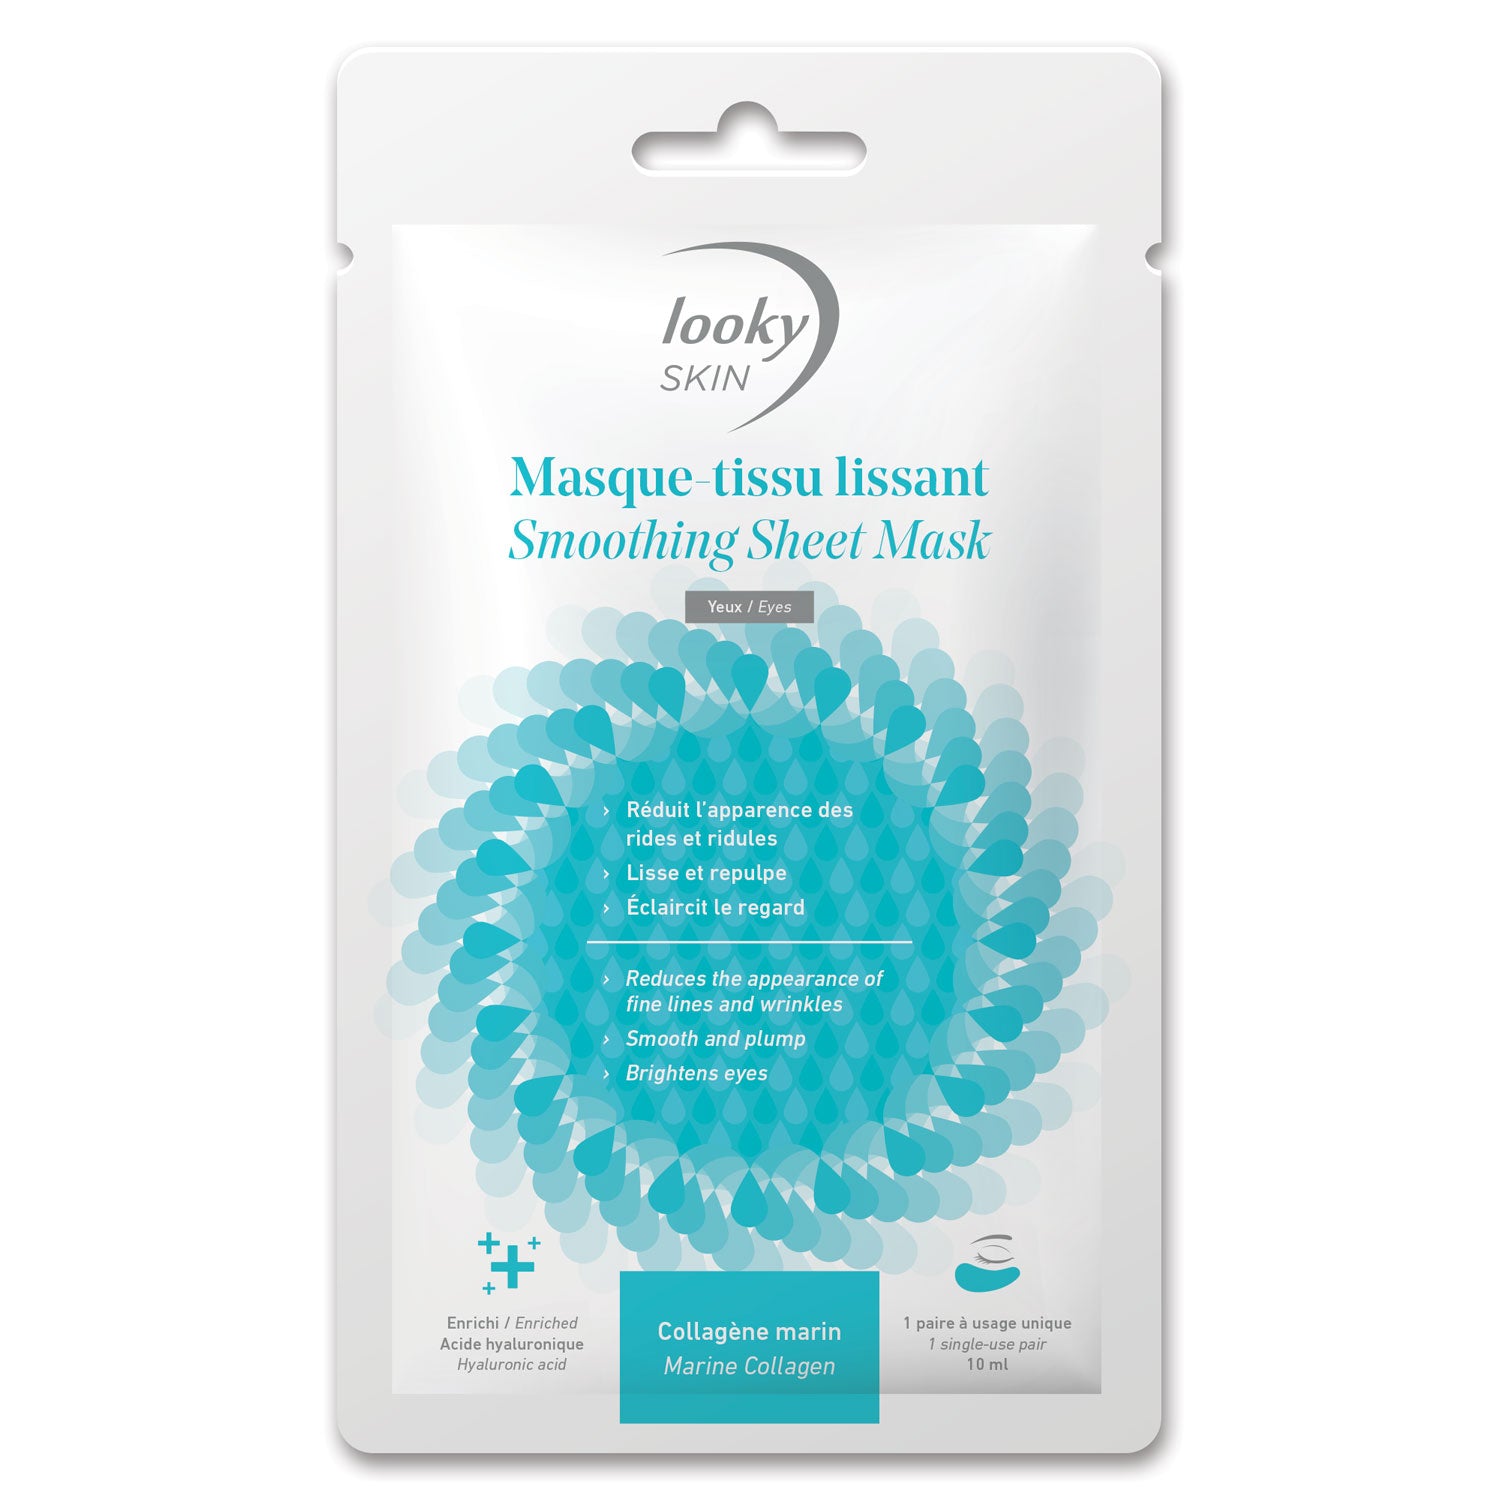 Looky Masque Tissu Yeux Lissant #03